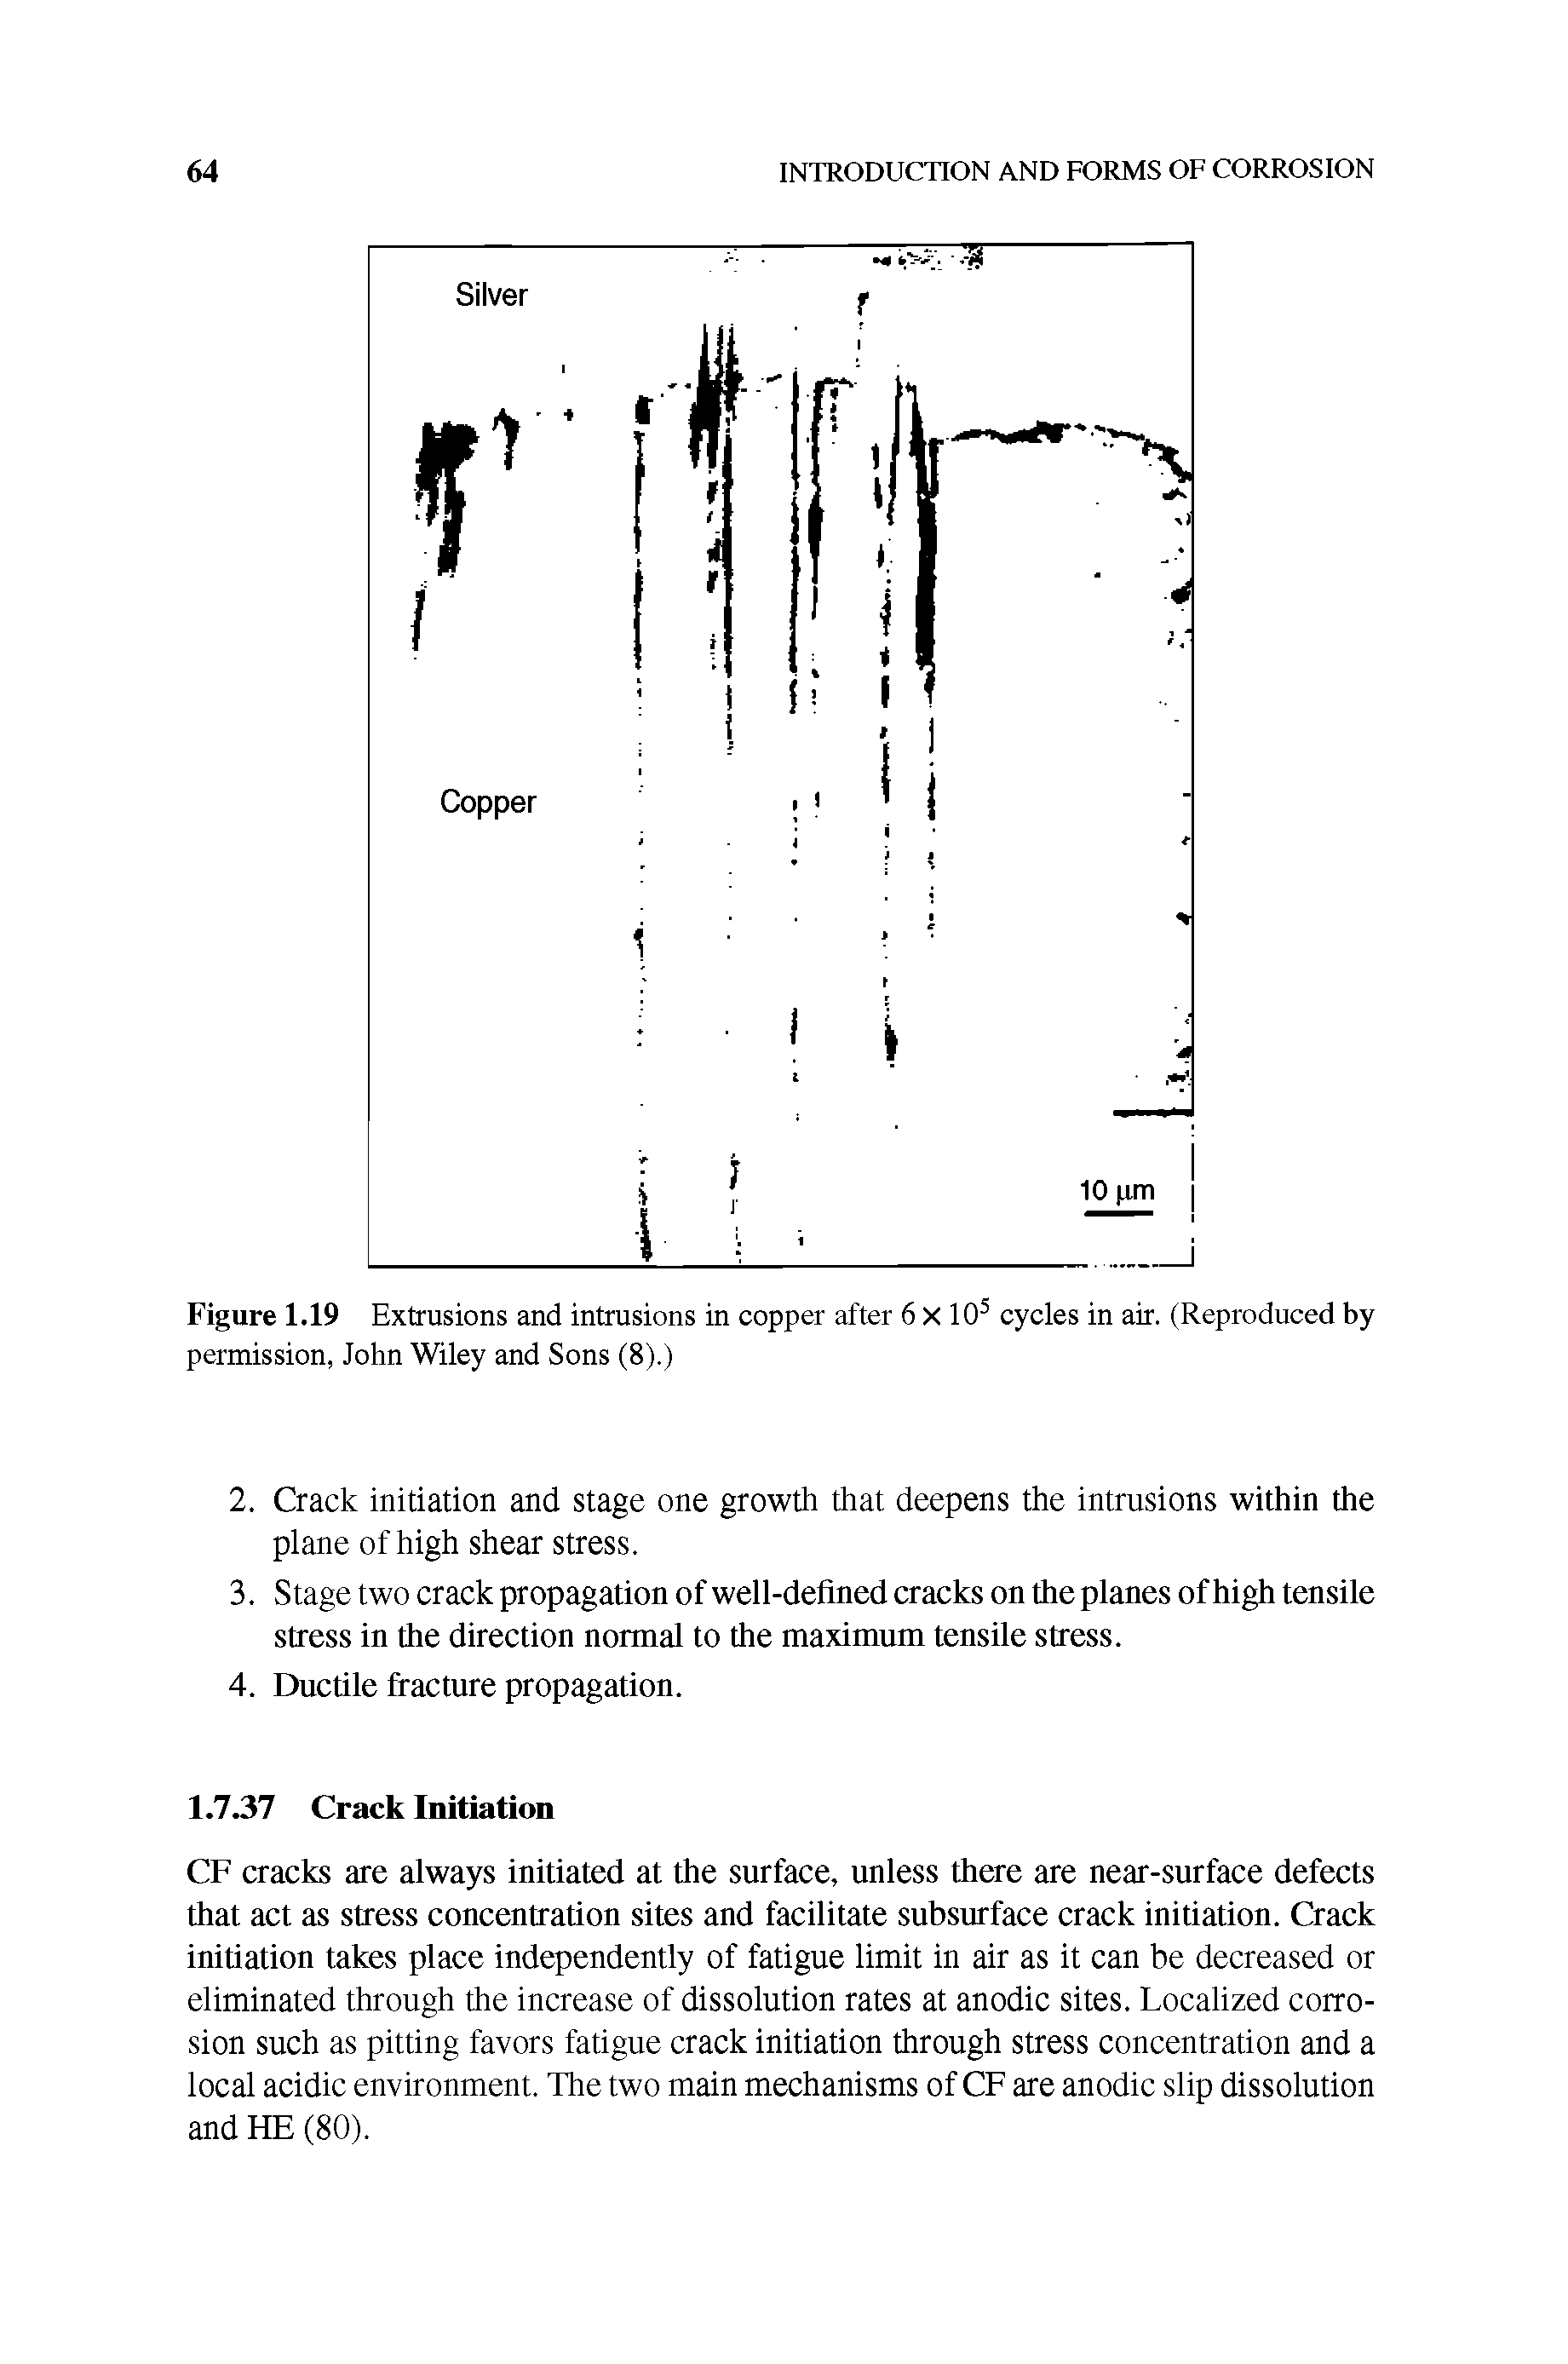 Figure 1.19 Extrusions and intrusions in copper after 6 X 10 cycles in air. (Reproduced by permission, John Wiley and Sons (8).)...